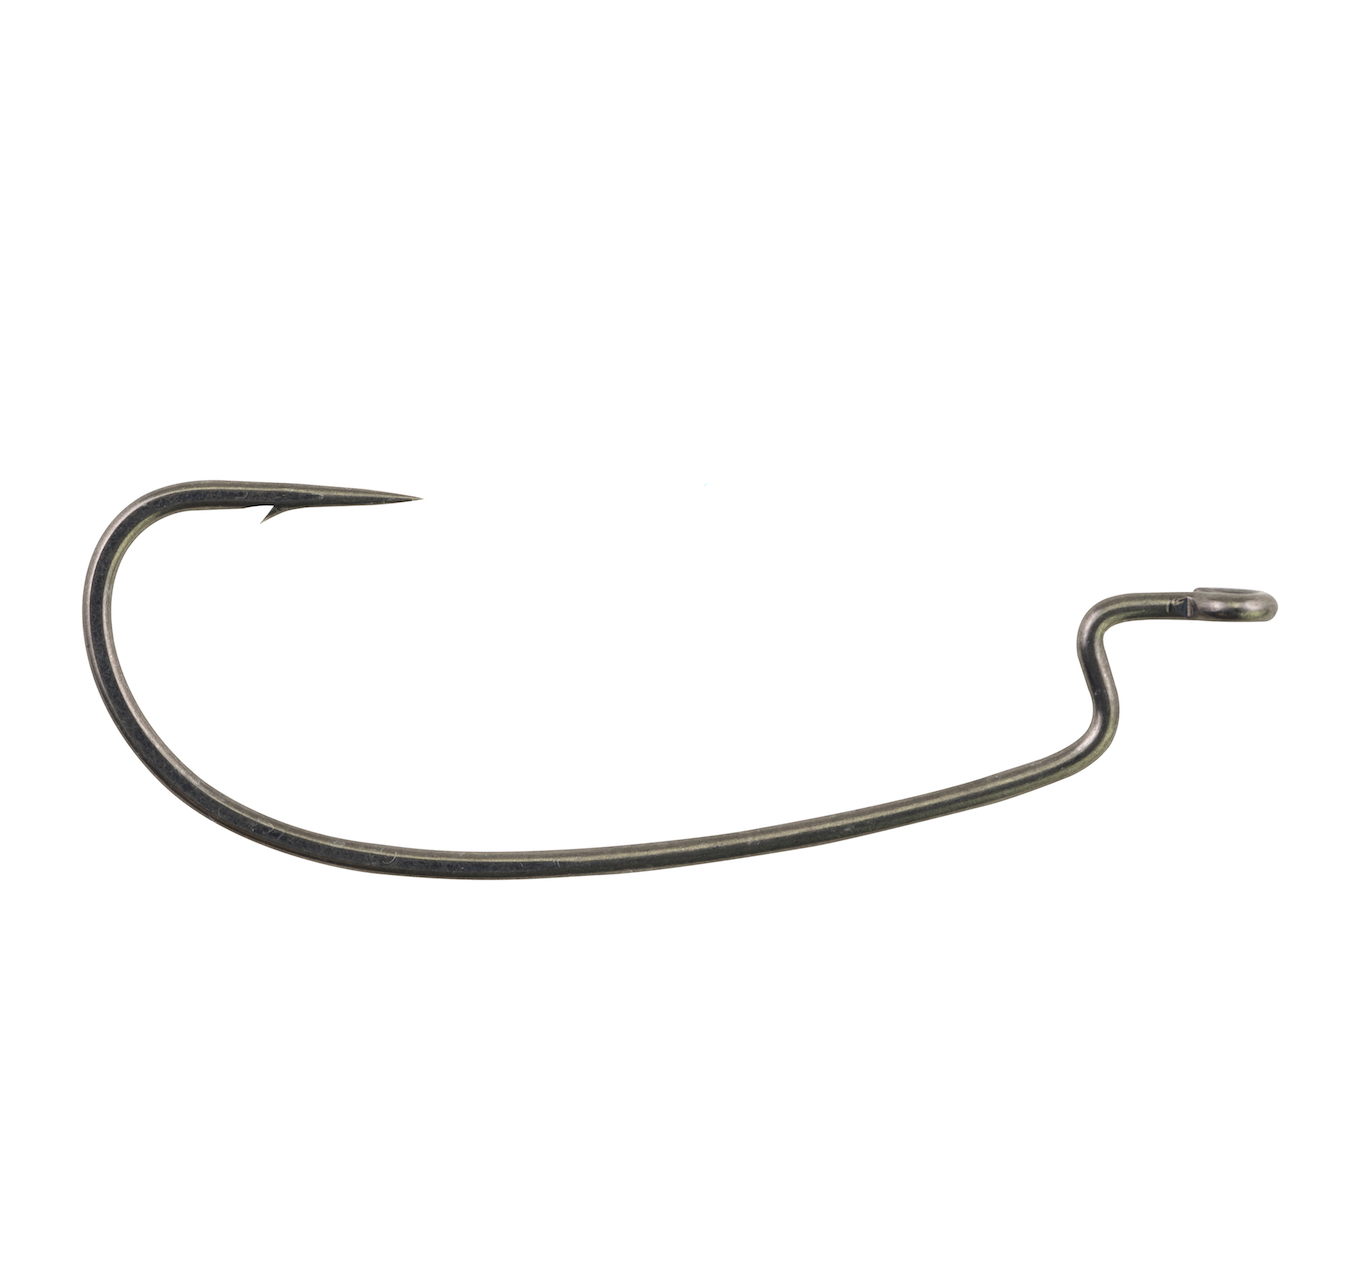 The Offset Worm hook is the standard hook shank with a round bend that is ideal for Texas-rigged worms and creatures, but the smaller sizes can be used for finesse presentations. Packages of seven in sizes 1/0 through 5/0 for $3.99.